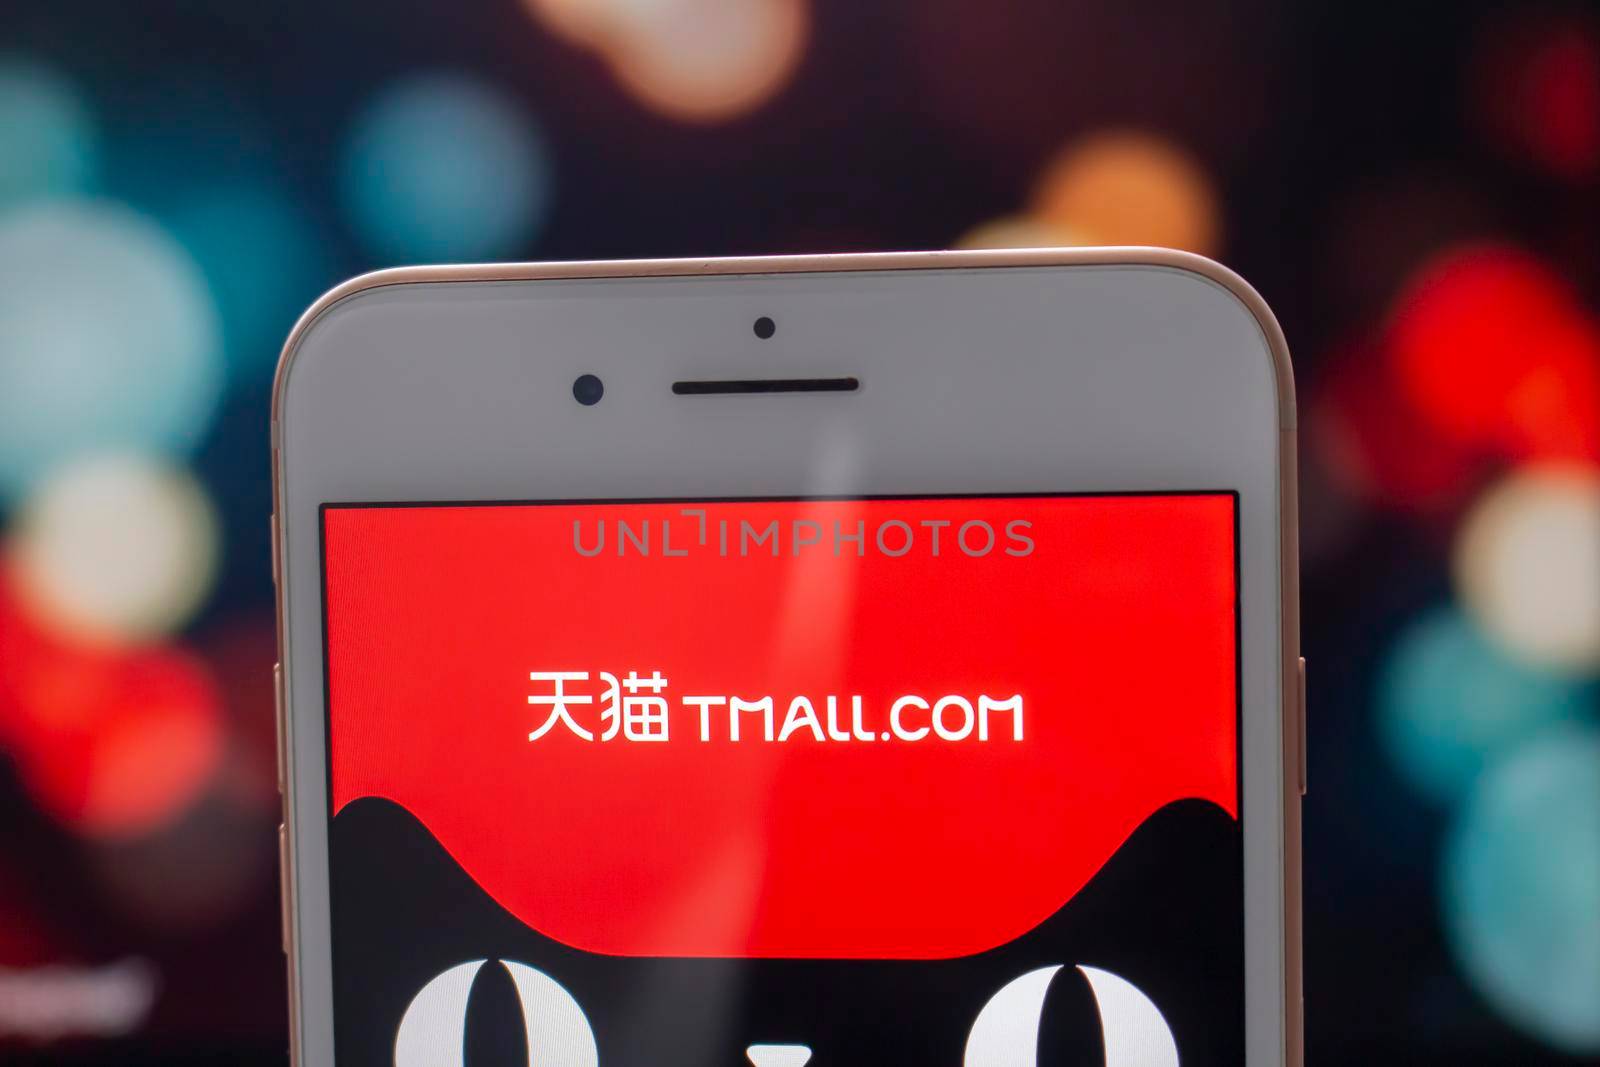 Calgary, Alberta. Canada May 22, 2020. A phone with Tmall on the screen. Tmall.com, formerly Taobao Mall, is a Chinese-language website for business-to-consumer online retail, spun off from Taobao, operated in China by Alibaba Group